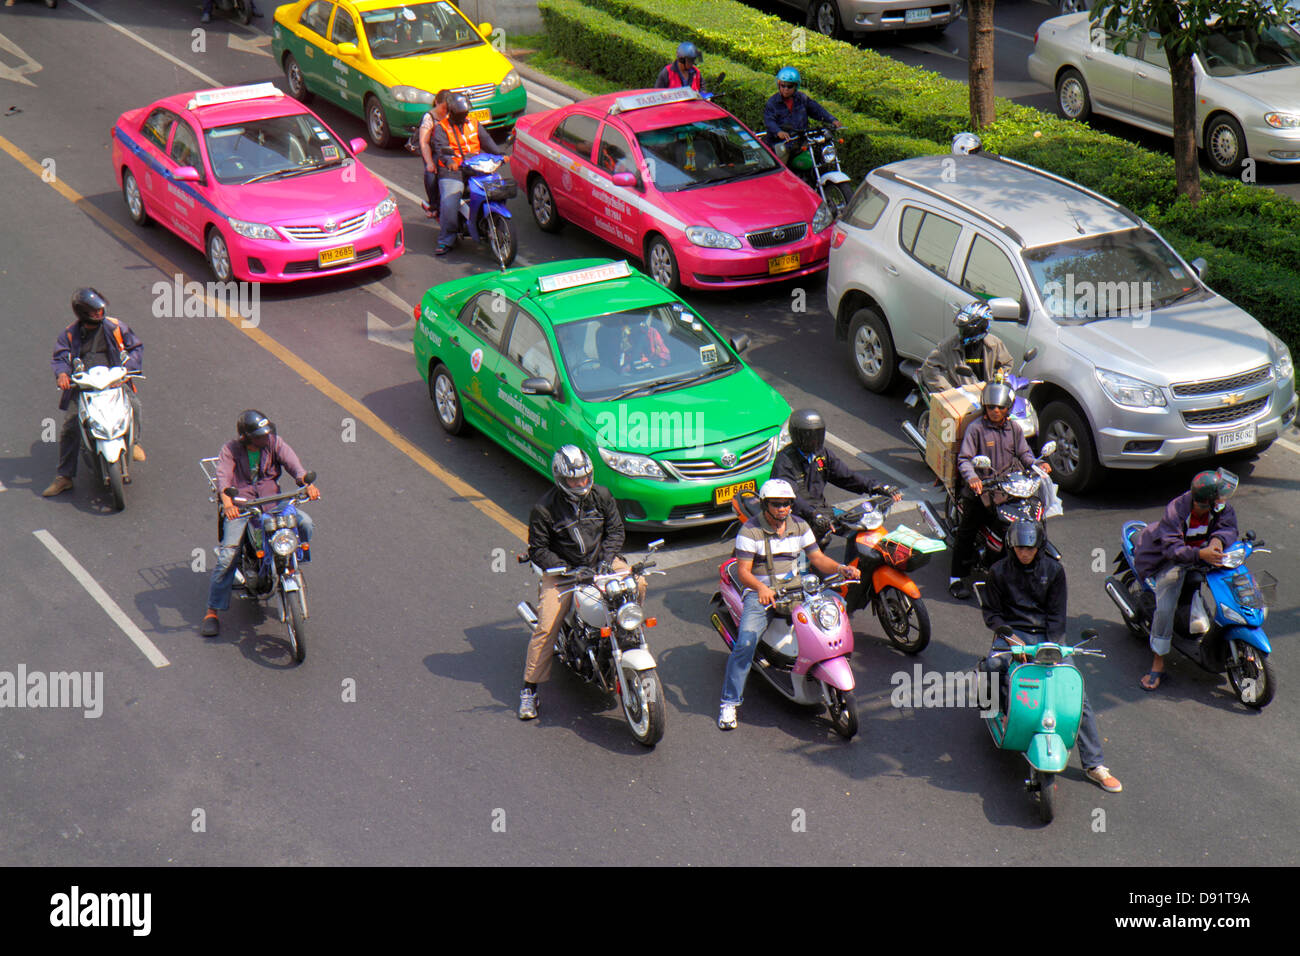 Bangkok Thailand,Thai,Pathum Wan,Phaya Thai Road,traffic,taxi taxis,cab,cabs,motorcycles,motor scooters,Skywalk,view,overhead,aerial overhead view fro Stock Photo